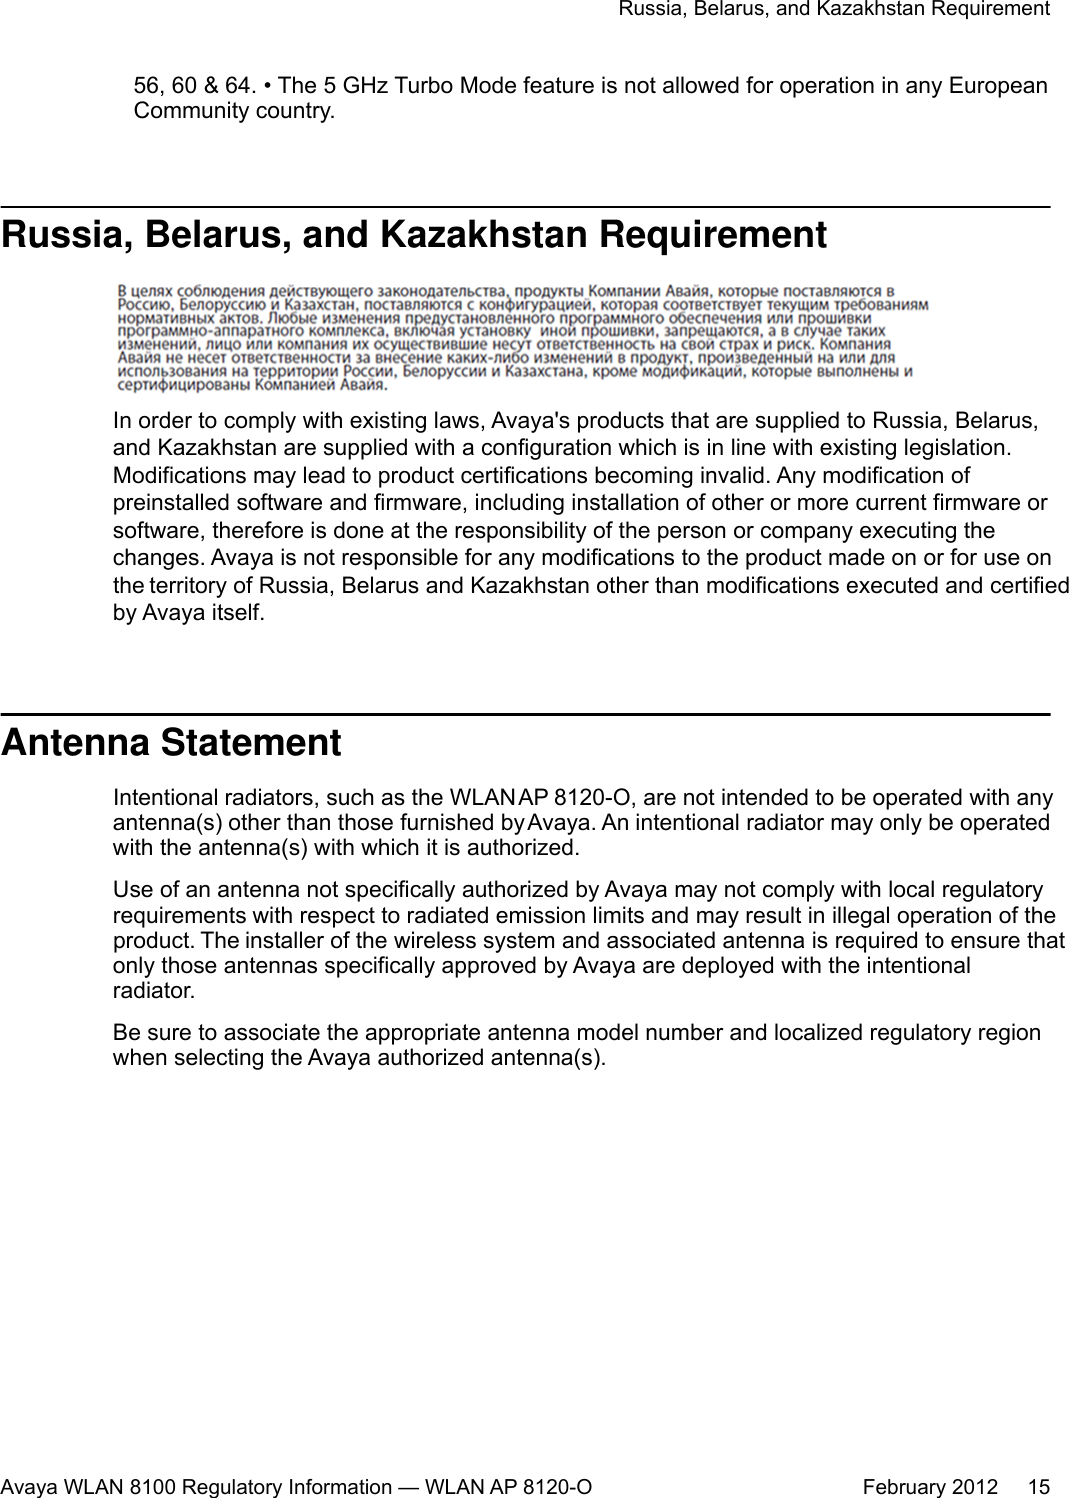 56, 60 &amp; 64. • The 5 GHz Turbo Mode feature is not allowed for operation in any EuropeanCommunity country.Russia, Belarus, and Kazakhstan RequirementIn order to comply with existing laws, Avaya&apos;s products that are supplied to Russia, Belarus,and Kazakhstan are supplied with a configuration which is in line with existing legislation.Modifications may lead to product certifications becoming invalid. Any modification ofpreinstalled software and firmware, including installation of other or more current firmware orsoftware, therefore is done at the responsibility of the person or company executing thechanges. Avaya is not responsible for any modifications to the product made on or for use onthe territory of Russia, Belarus and Kazakhstan other than modifications executed and certifiedby Avaya itself.Antenna StatementIntentional radiators, such as the WLAN AP 8120-O, are not intended to be operated with anyantenna(s) other than those furnished by Avaya. An intentional radiator may only be operatedwith the antenna(s) with which it is authorized.Use of an antenna not specifically authorized by Avaya may not comply with local regulatoryrequirements with respect to radiated emission limits and may result in illegal operation of theproduct. The installer of the wireless system and associated antenna is required to ensure thatonly those antennas specifically approved by Avaya are deployed with the intentionalradiator.Be sure to associate the appropriate antenna model number and localized regulatory regionwhen selecting the Avaya authorized antenna(s).Russia, Belarus, and Kazakhstan RequirementAvaya WLAN 8100 Regulatory Information — WLAN AP 8120-O February 2012     15